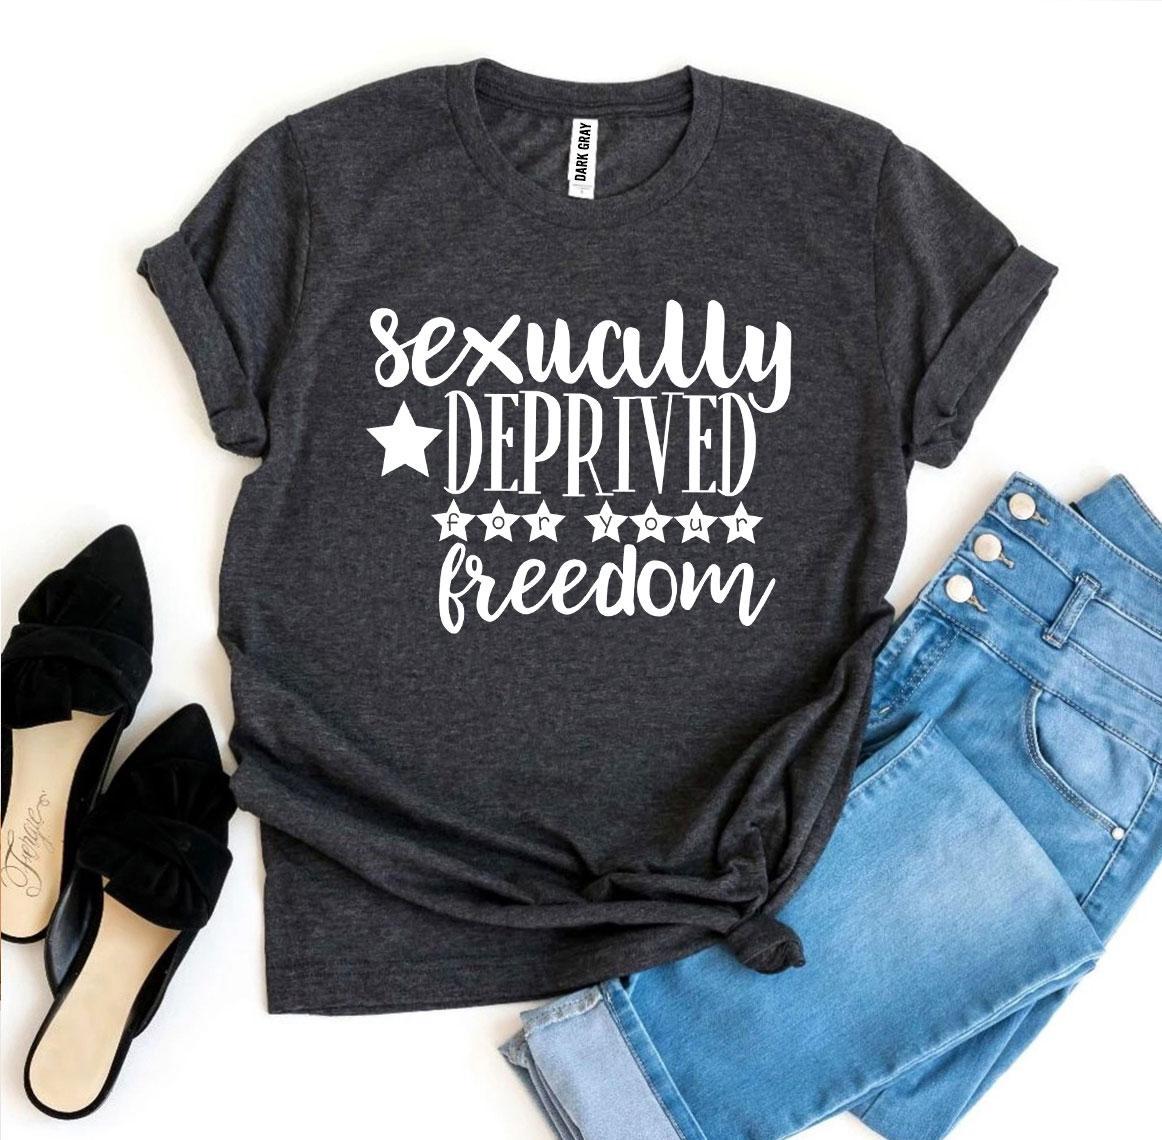 Sexually Deprived For Your Freedom T-shirt